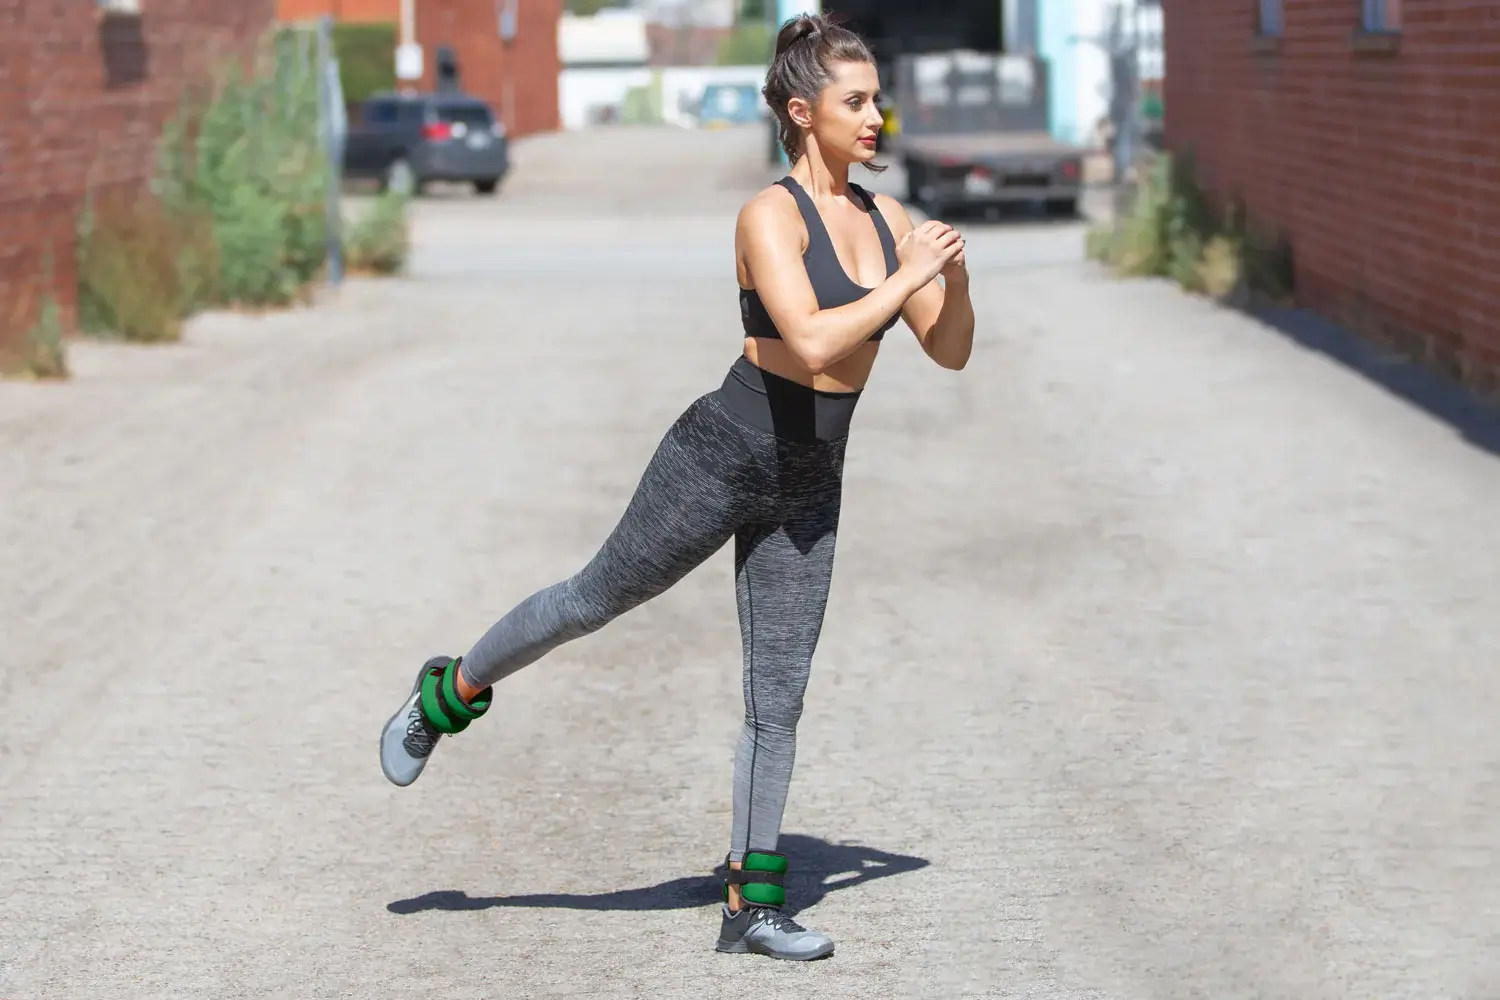 Woman the use of ankle weights when running or walking